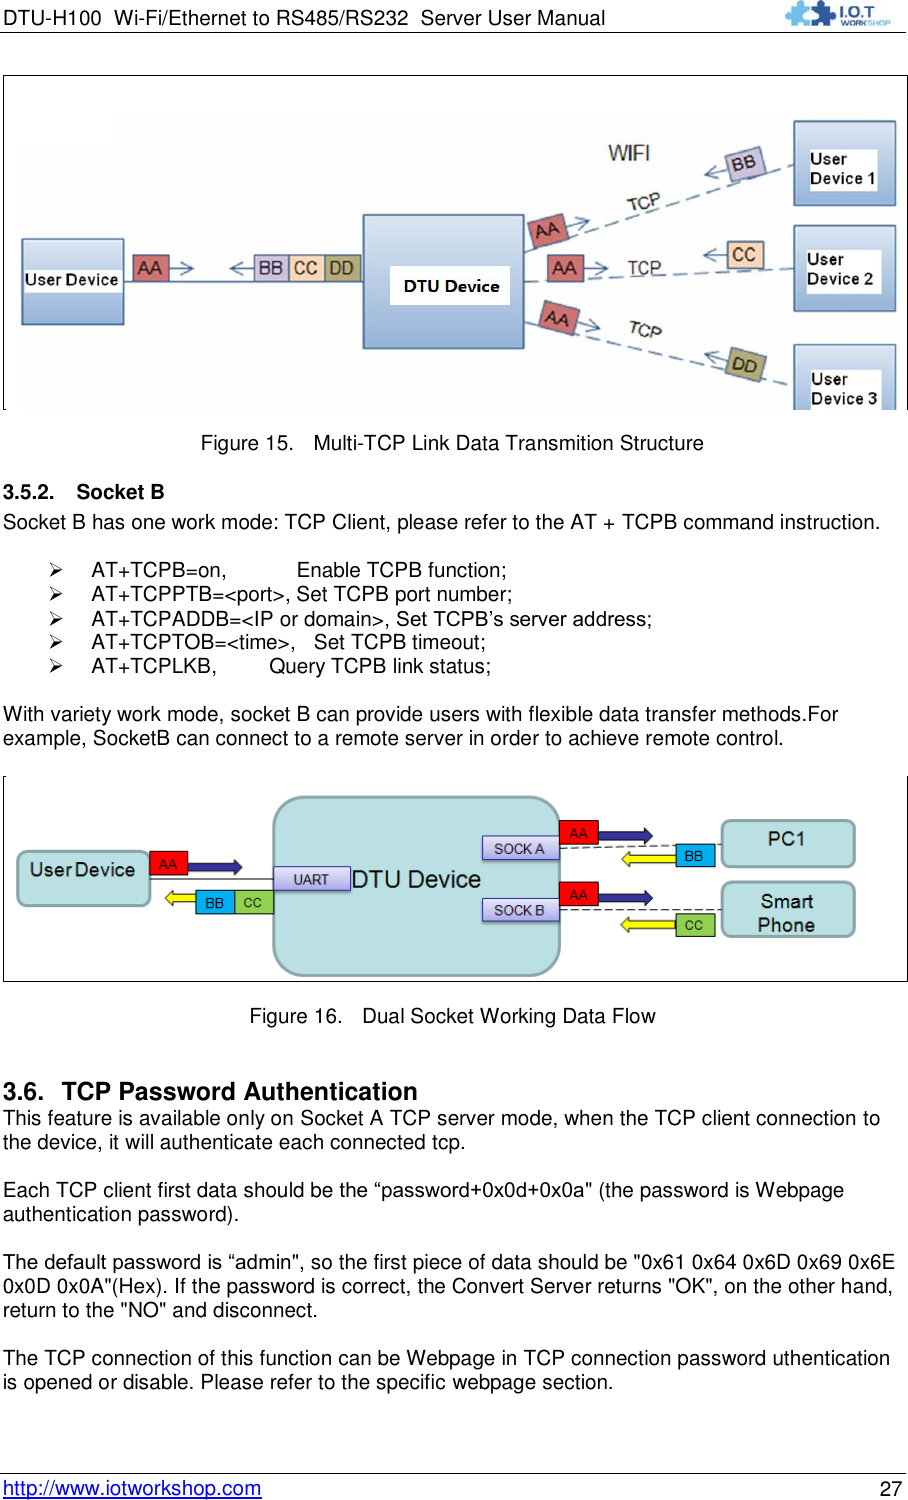 DTU-H100 Wi-Fi/Ethernet to RS485/RS232  Server User Manual    http://www.iotworkshop.com 27  Figure 15. Multi-TCP Link Data Transmition Structure 3.5.2. Socket B Socket B has one work mode: TCP Client, please refer to the AT + TCPB command instruction.   AT+TCPB=on,            Enable TCPB function;  AT+TCPPTB=&lt;port&gt;, Set TCPB port number;  AT+TCPADDB=&lt;IP or domain&gt;, Set TCPB‟s server address;  AT+TCPTOB=&lt;time&gt;,   Set TCPB timeout;  AT+TCPLKB,         Query TCPB link status;  With variety work mode, socket B can provide users with flexible data transfer methods.For example, SocketB can connect to a remote server in order to achieve remote control.  Figure 16. Dual Socket Working Data Flow 3.6. TCP Password Authentication This feature is available only on Socket A TCP server mode, when the TCP client connection to the device, it will authenticate each connected tcp.  Each TCP client first data should be the “password+0x0d+0x0a&quot; (the password is Webpage authentication password).  The default password is “admin&quot;, so the first piece of data should be &quot;0x61 0x64 0x6D 0x69 0x6E 0x0D 0x0A&quot;(Hex). If the password is correct, the Convert Server returns &quot;OK&quot;, on the other hand, return to the &quot;NO&quot; and disconnect.  The TCP connection of this function can be Webpage in TCP connection password uthentication is opened or disable. Please refer to the specific webpage section.  